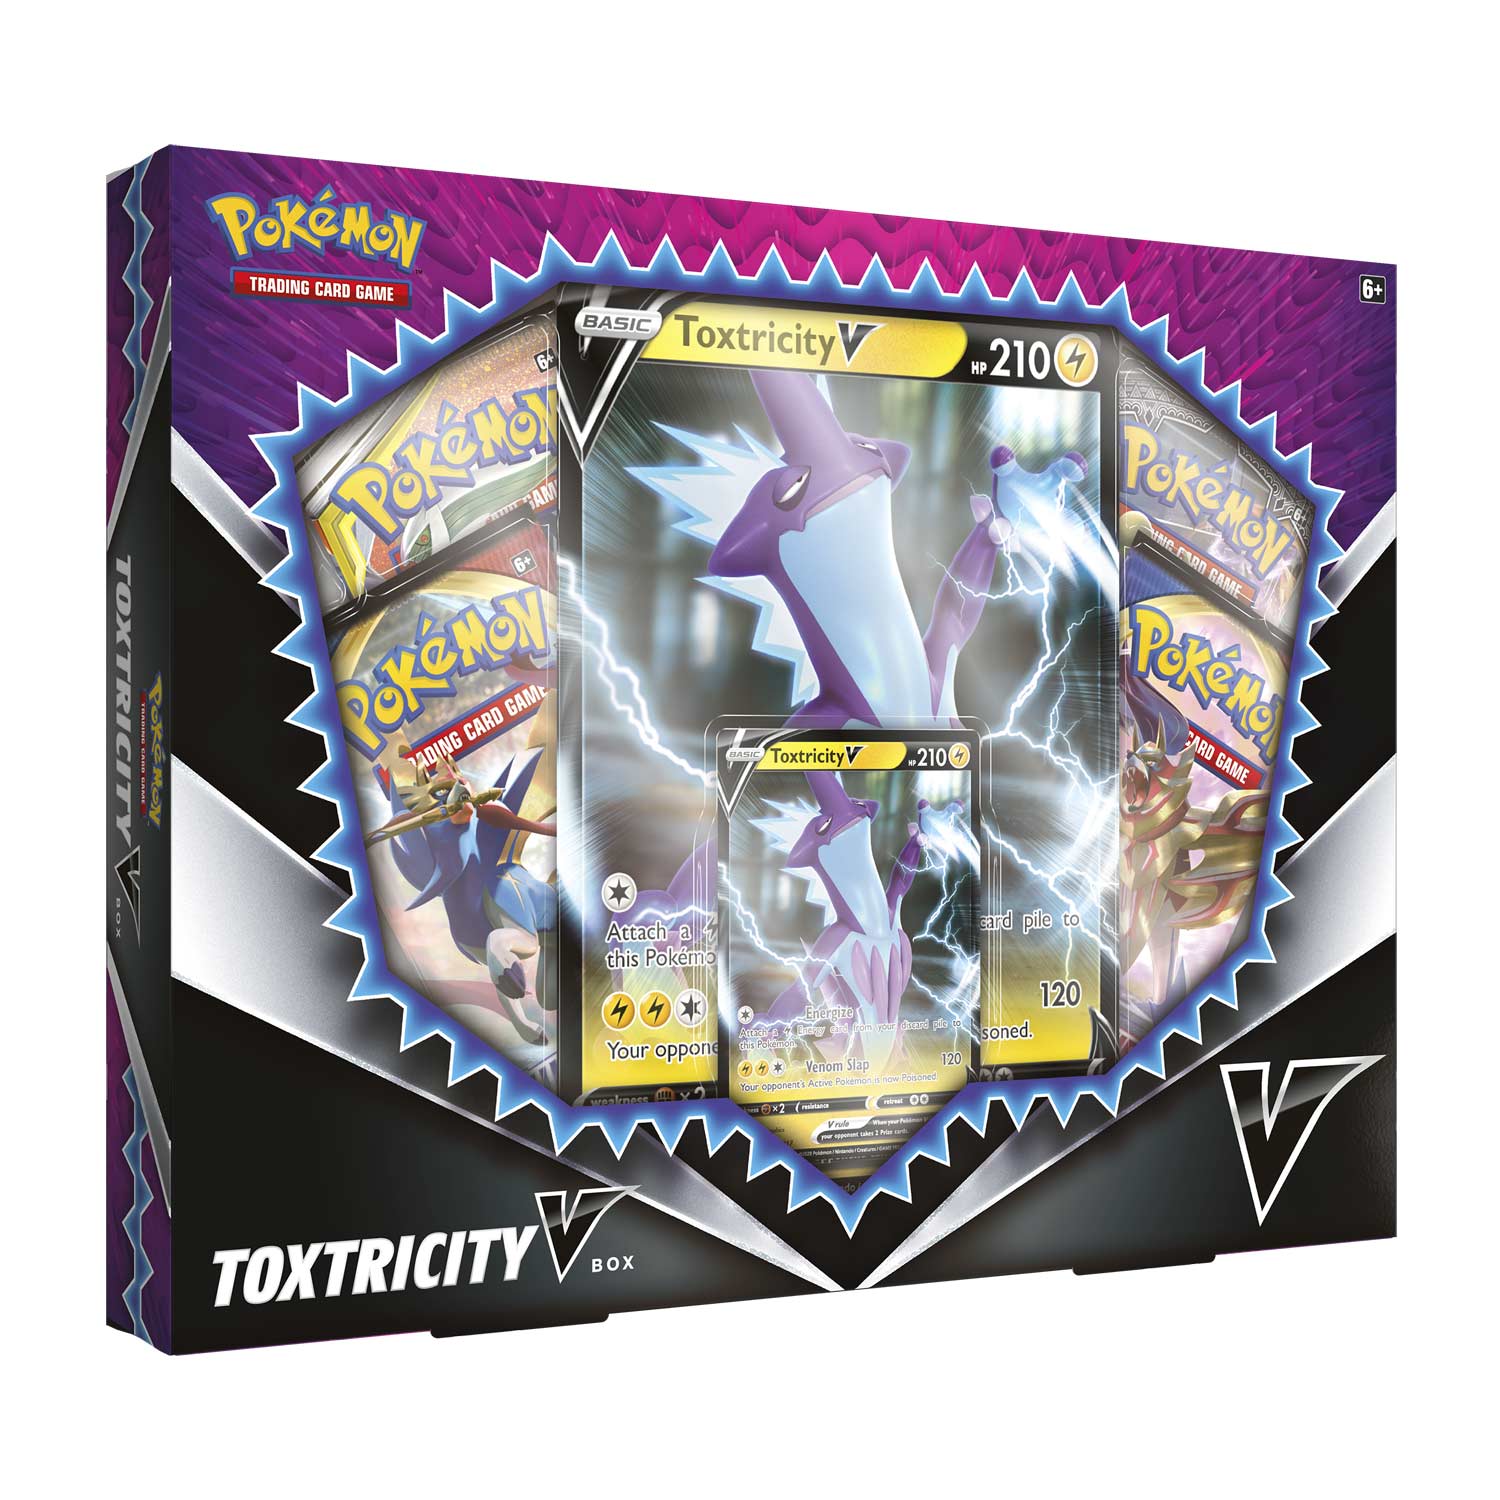 Pokemon Toxtricity V Box Collection New & Sealed Inc Booster Packs & Promo Cards 